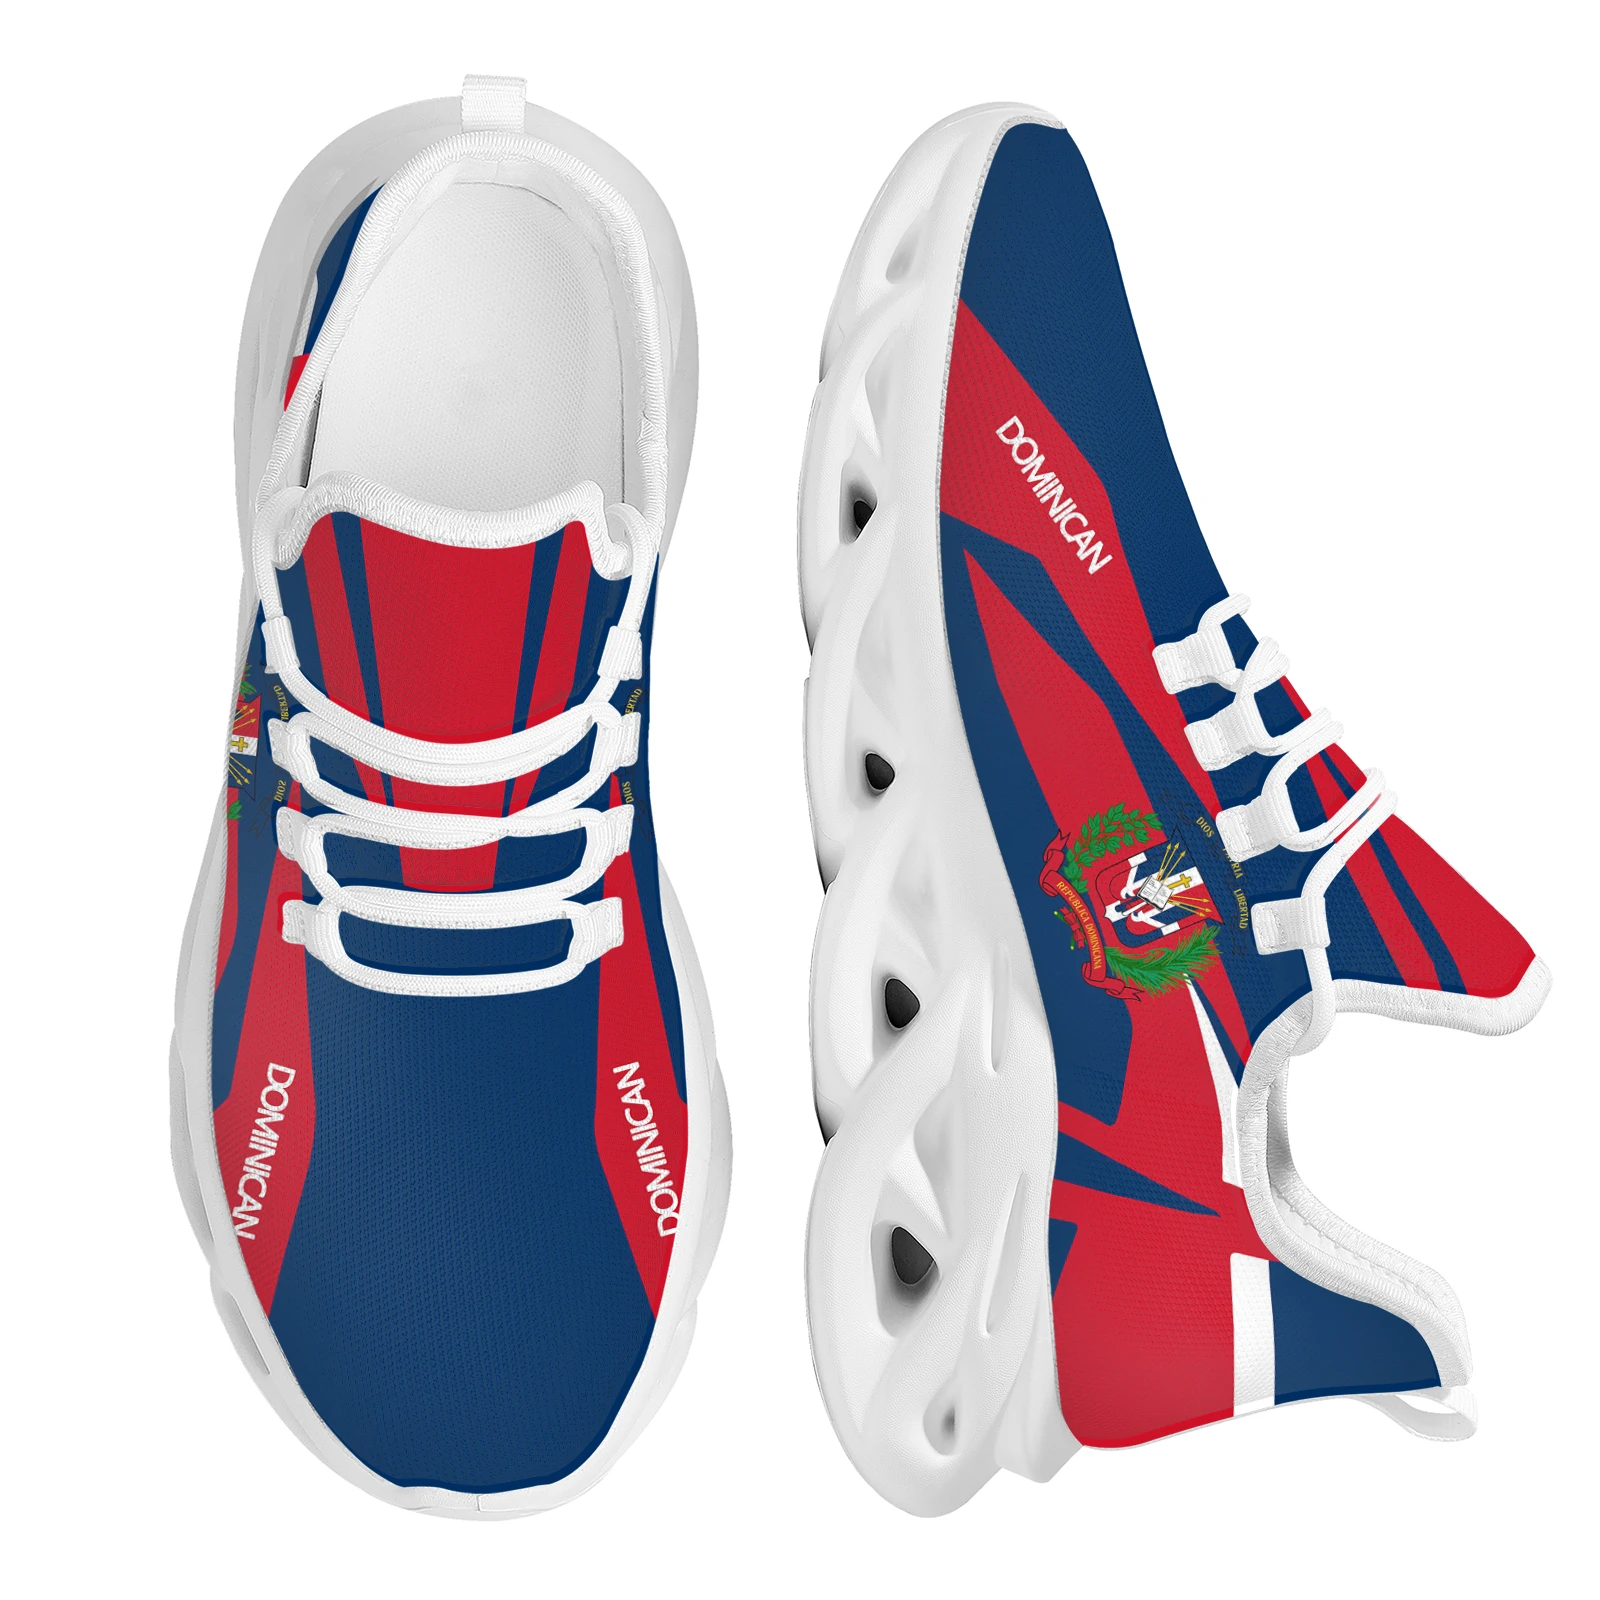 

INSTANTARTS Dominican National Flag Printing National Emblem Design Lightweight Breathable Blade Shoes Casual Shoes Zapatos